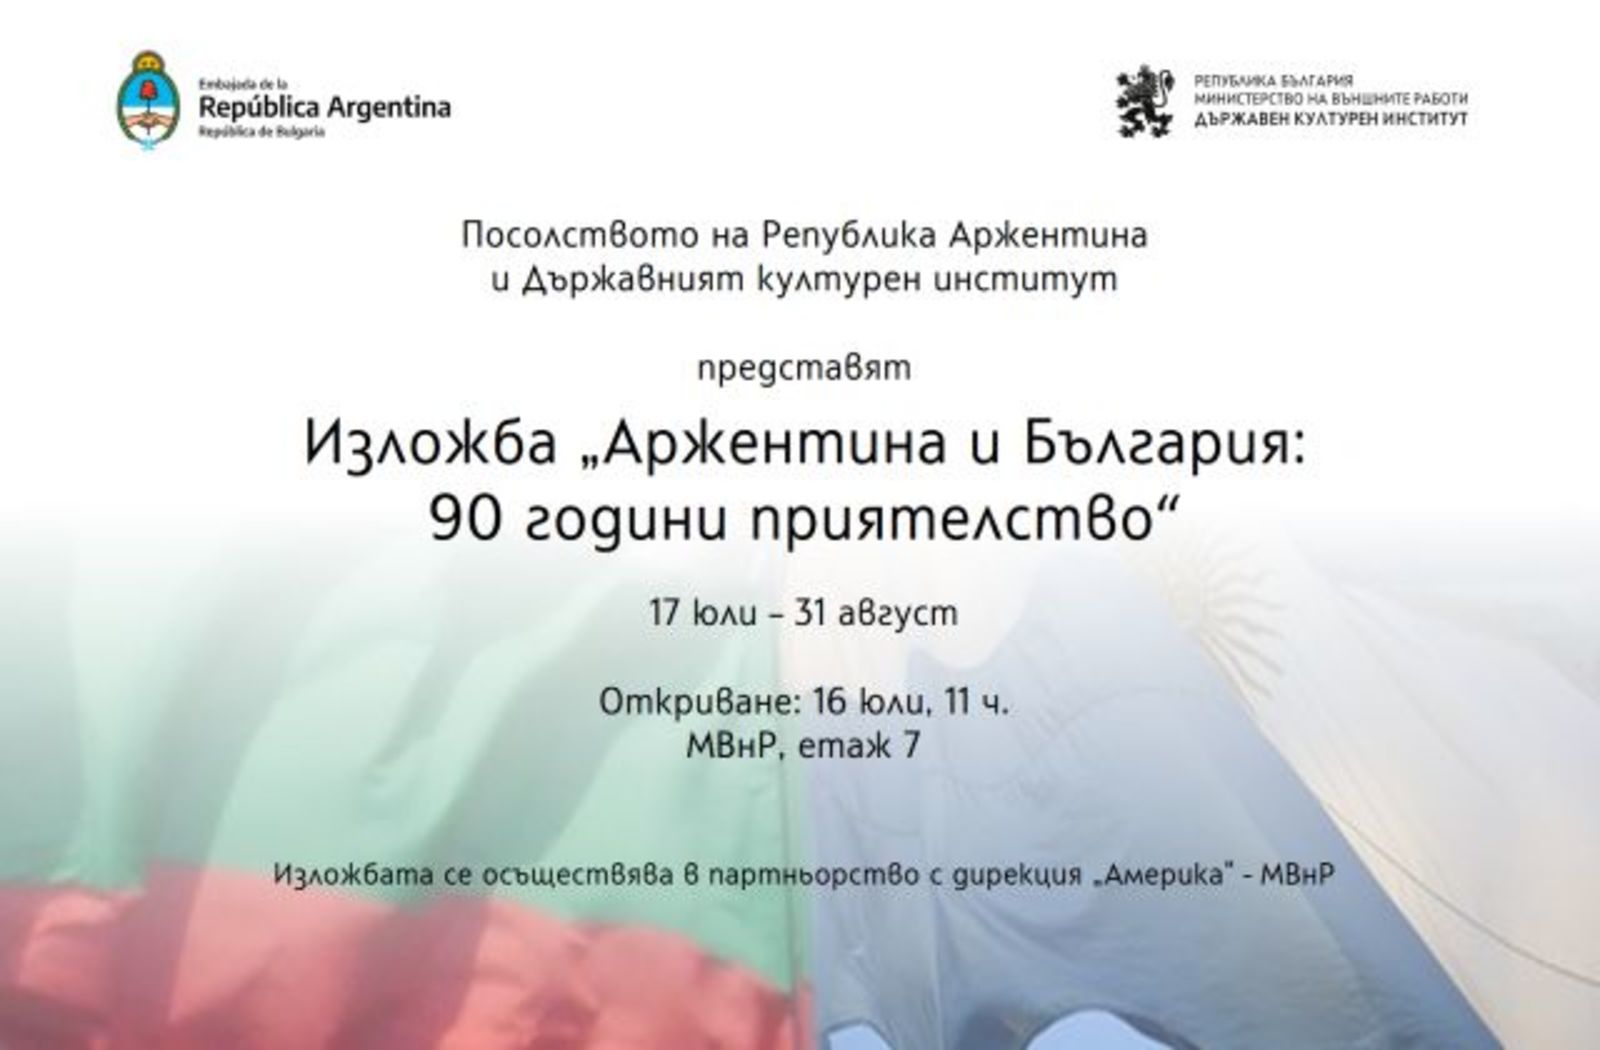 The exhibition "Argentina and Bulgaria: 90 Years of Friendship"